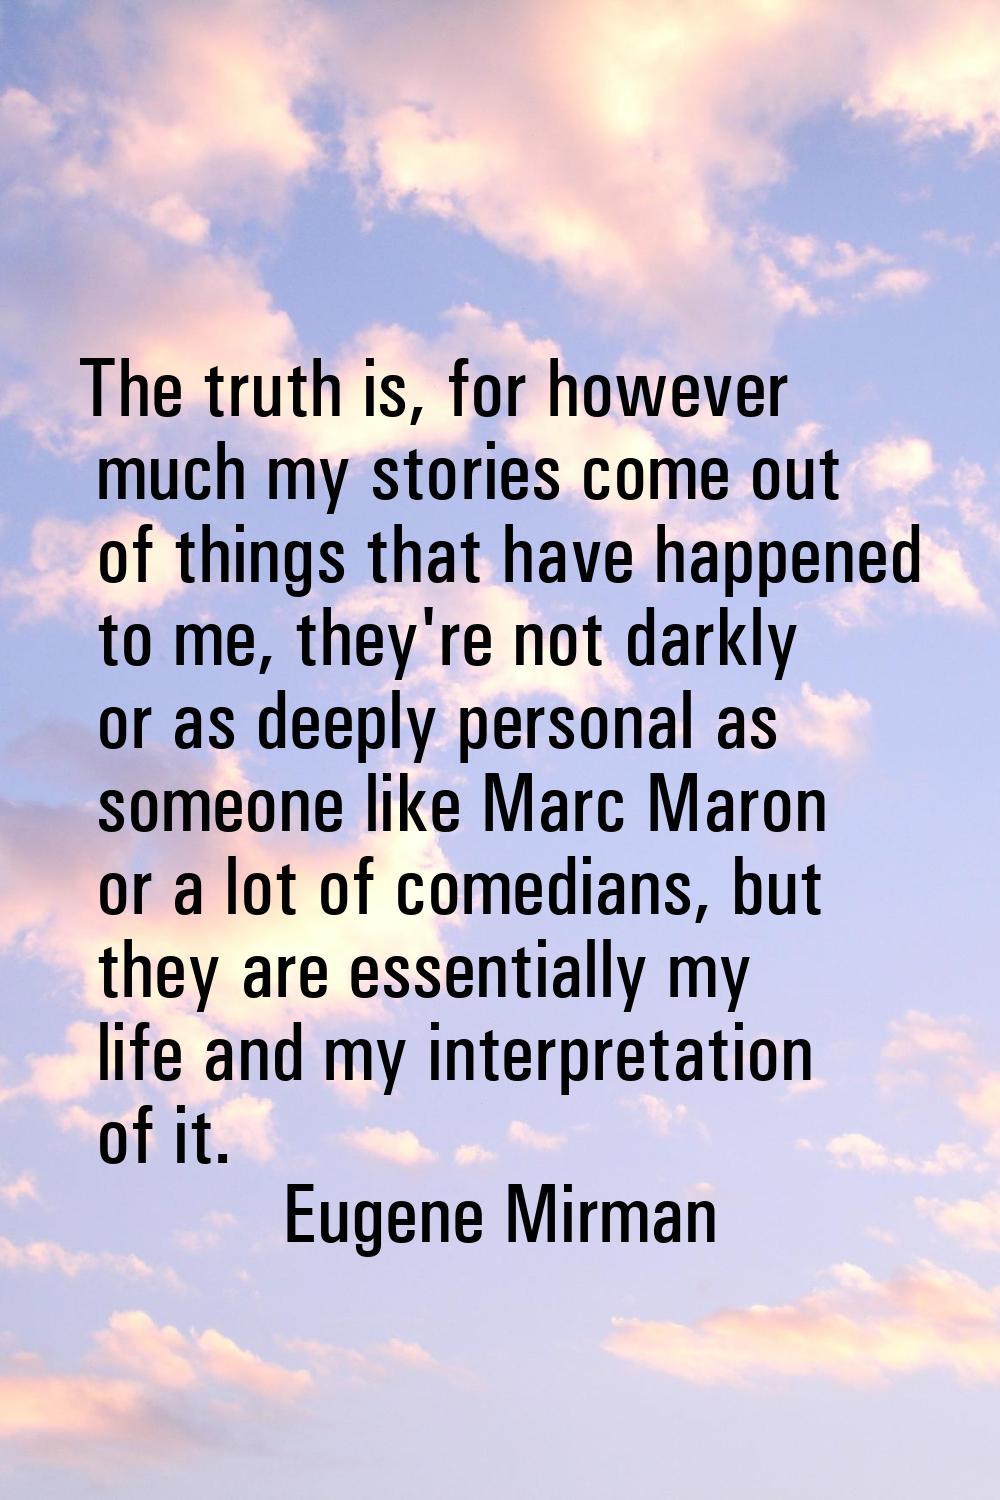 The truth is, for however much my stories come out of things that have happened to me, they're not 